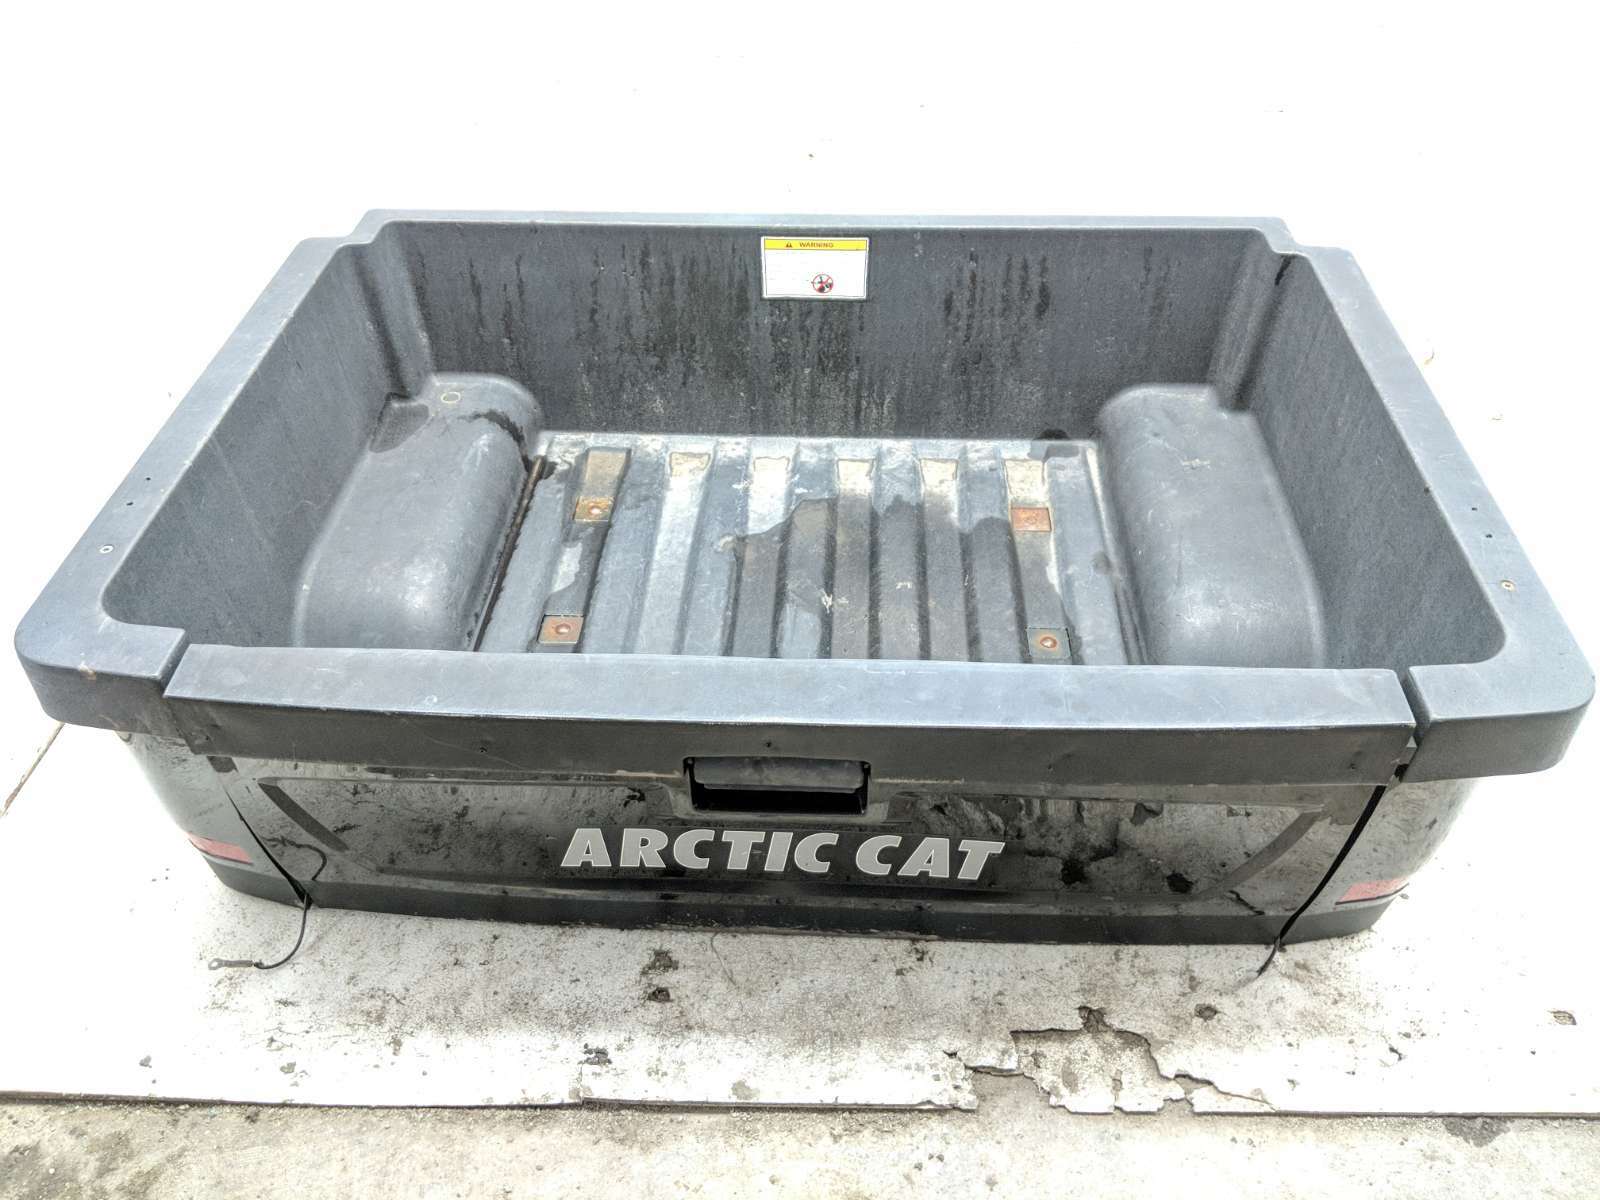 08 Arctic Cat Prowler XT 650 4x4 Rear Cargo Bed Box Assembly